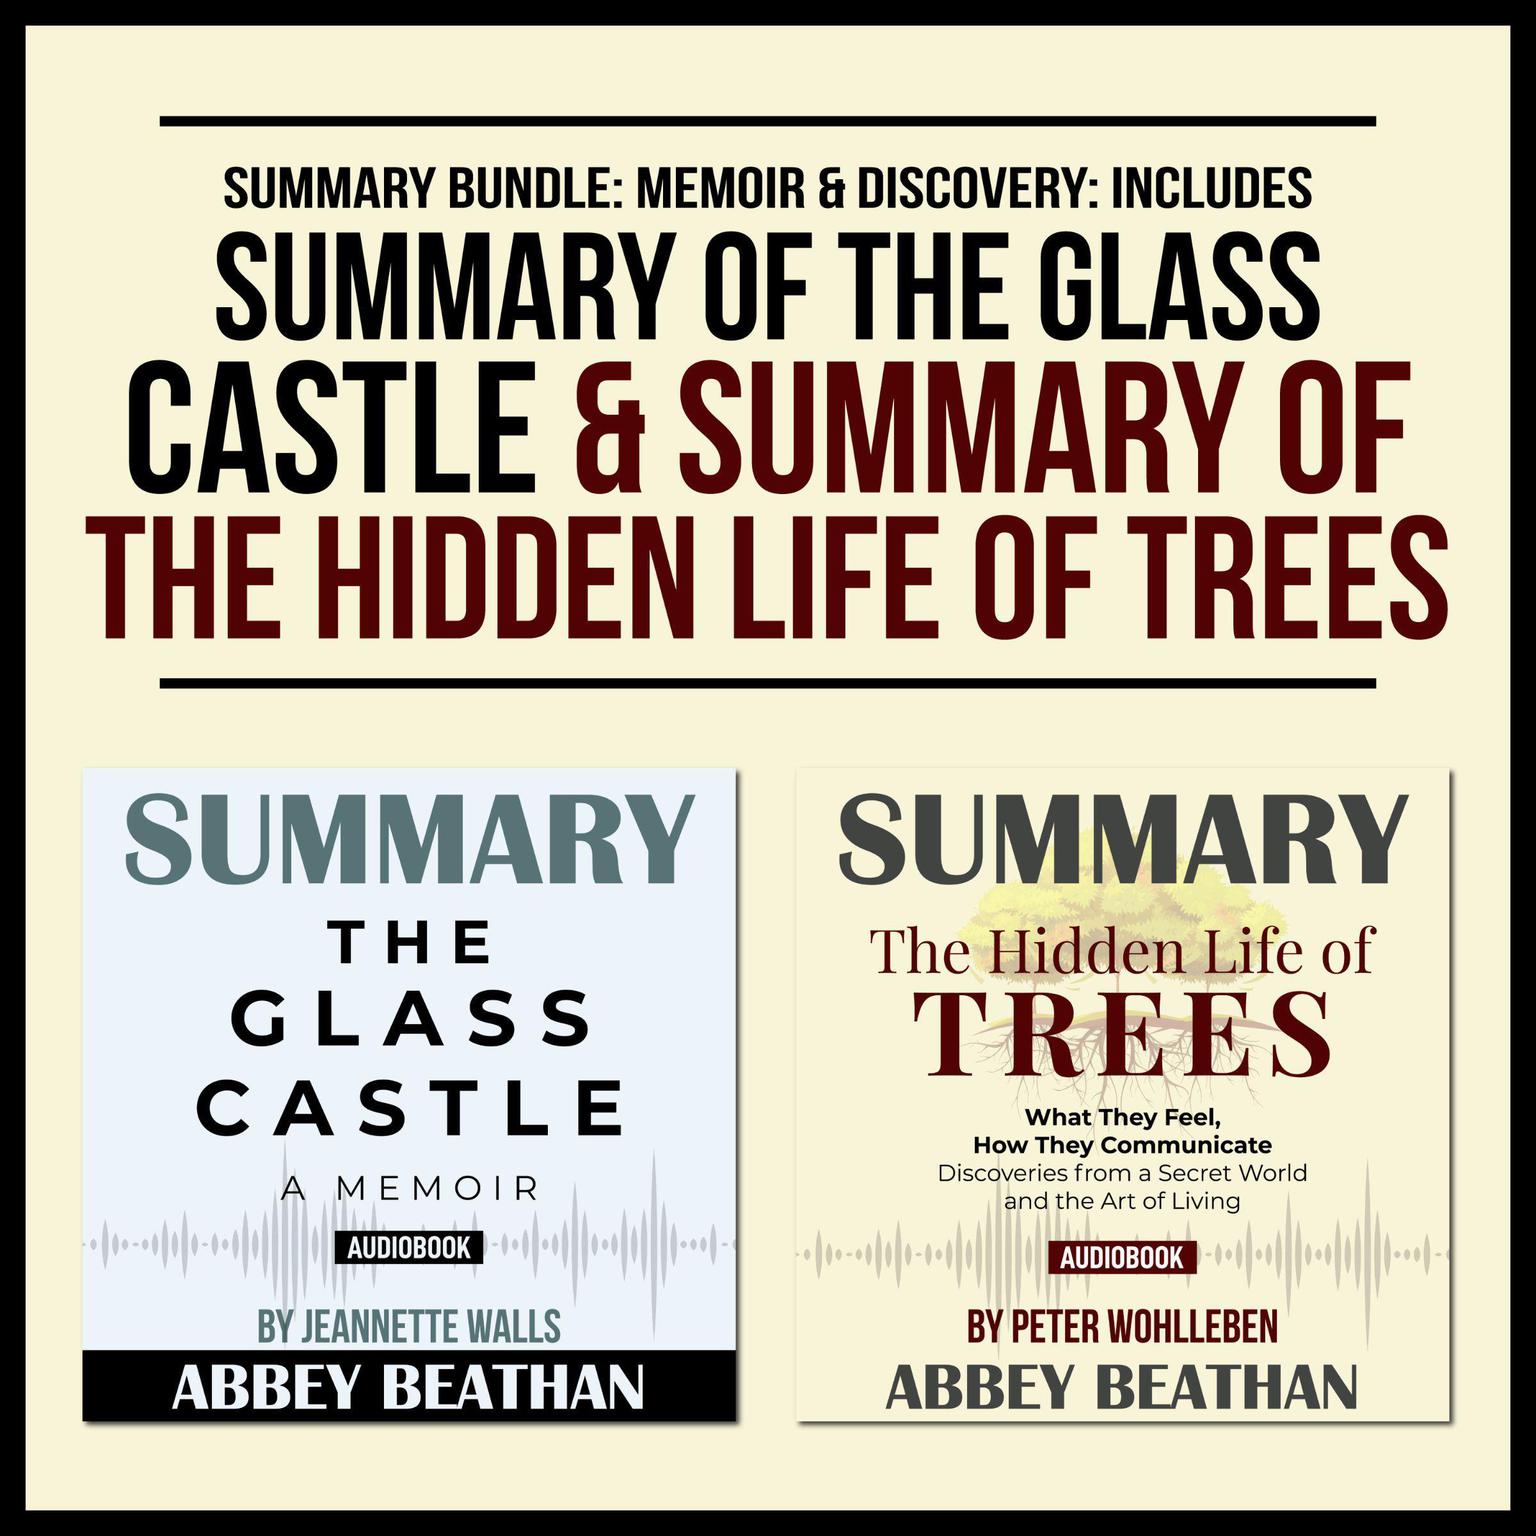 Summary Bundle: Memoir & Discovery: Includes Summary of The Glass Castle & Summary of The Hidden Life of Trees Audiobook, by Abbey Beathan